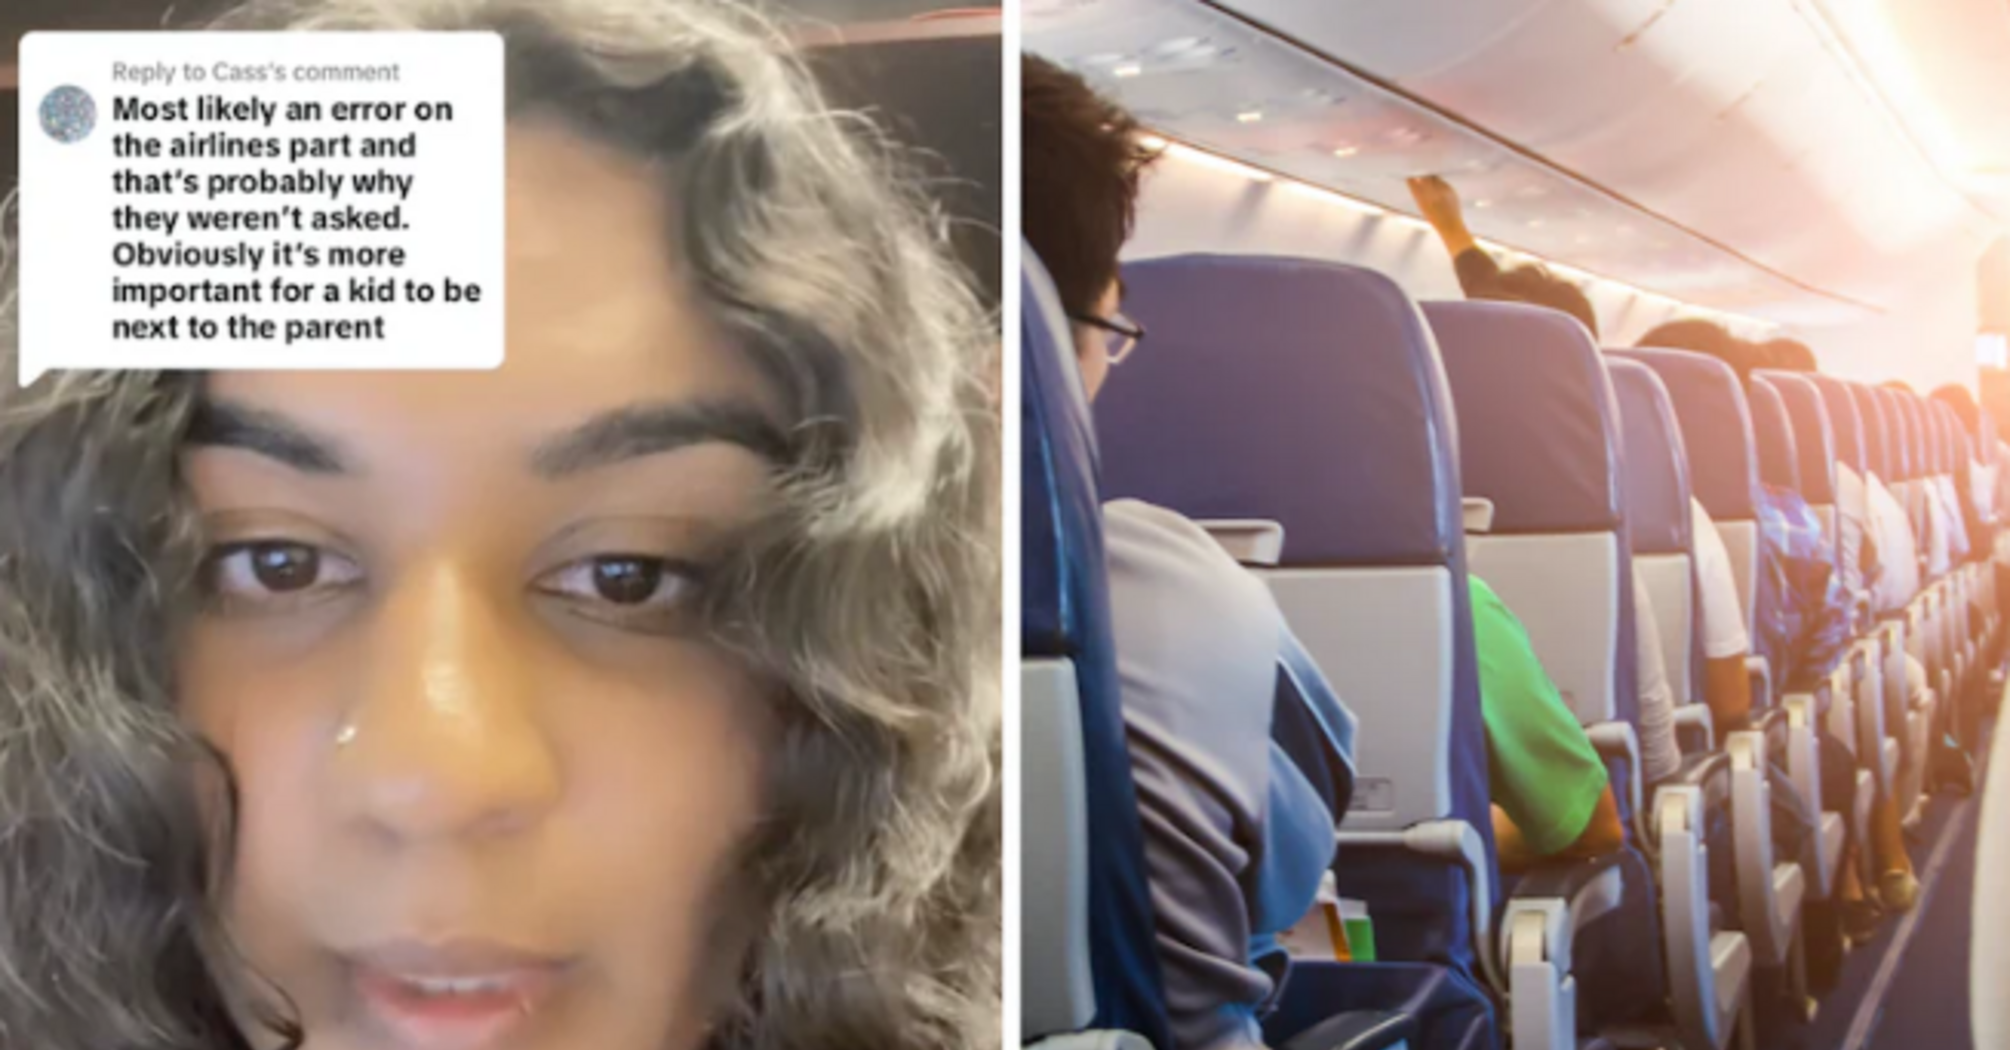 The woman bought a plane ticket next to her fiancé, but the flight attendant moved her